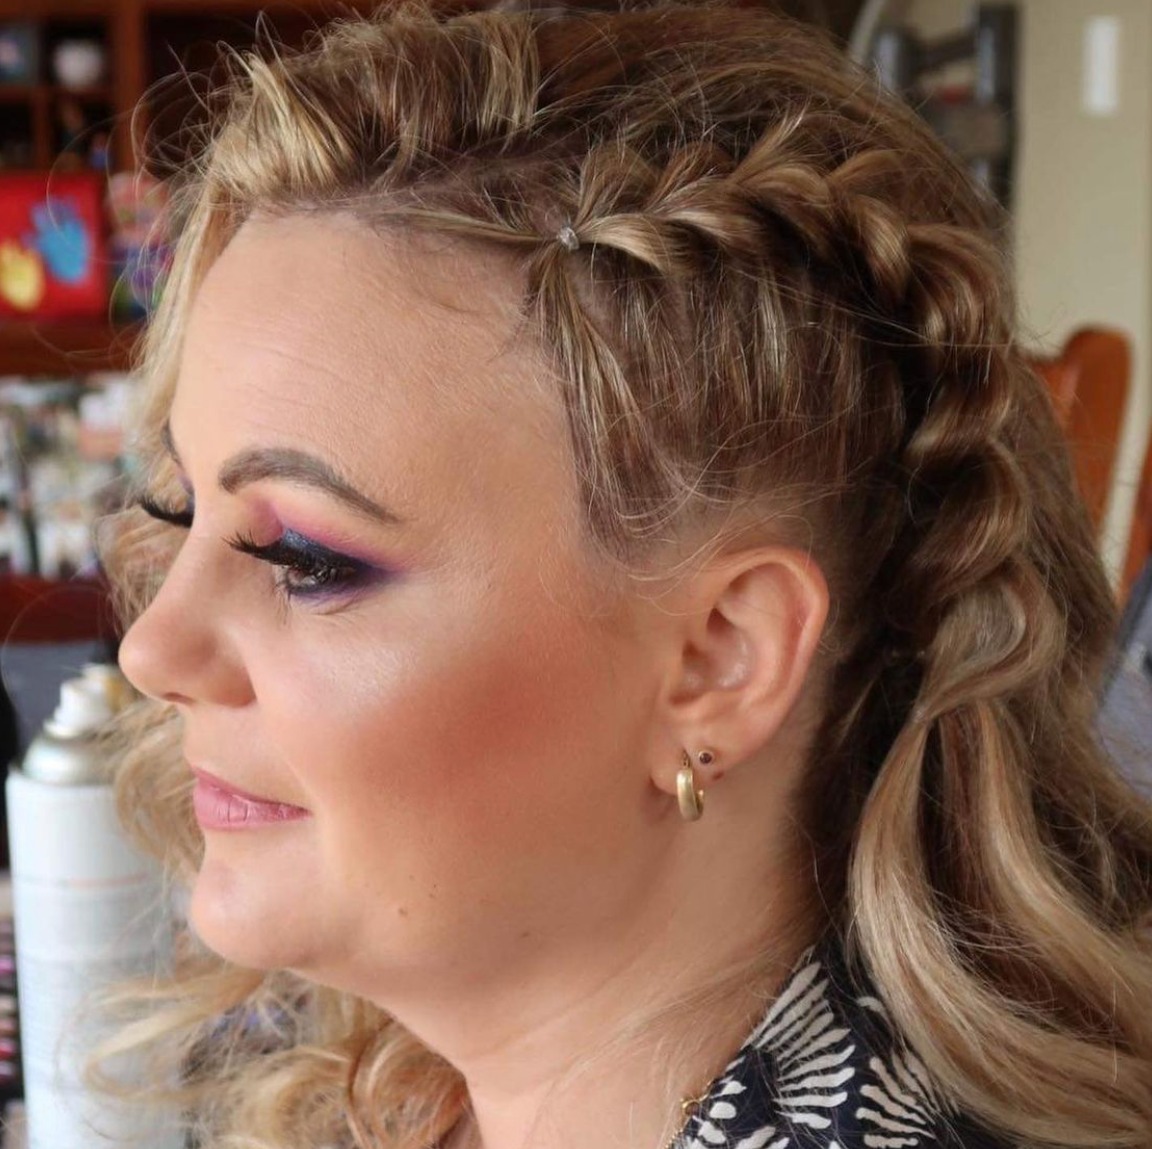 80’s Makeup and Hair Auckland